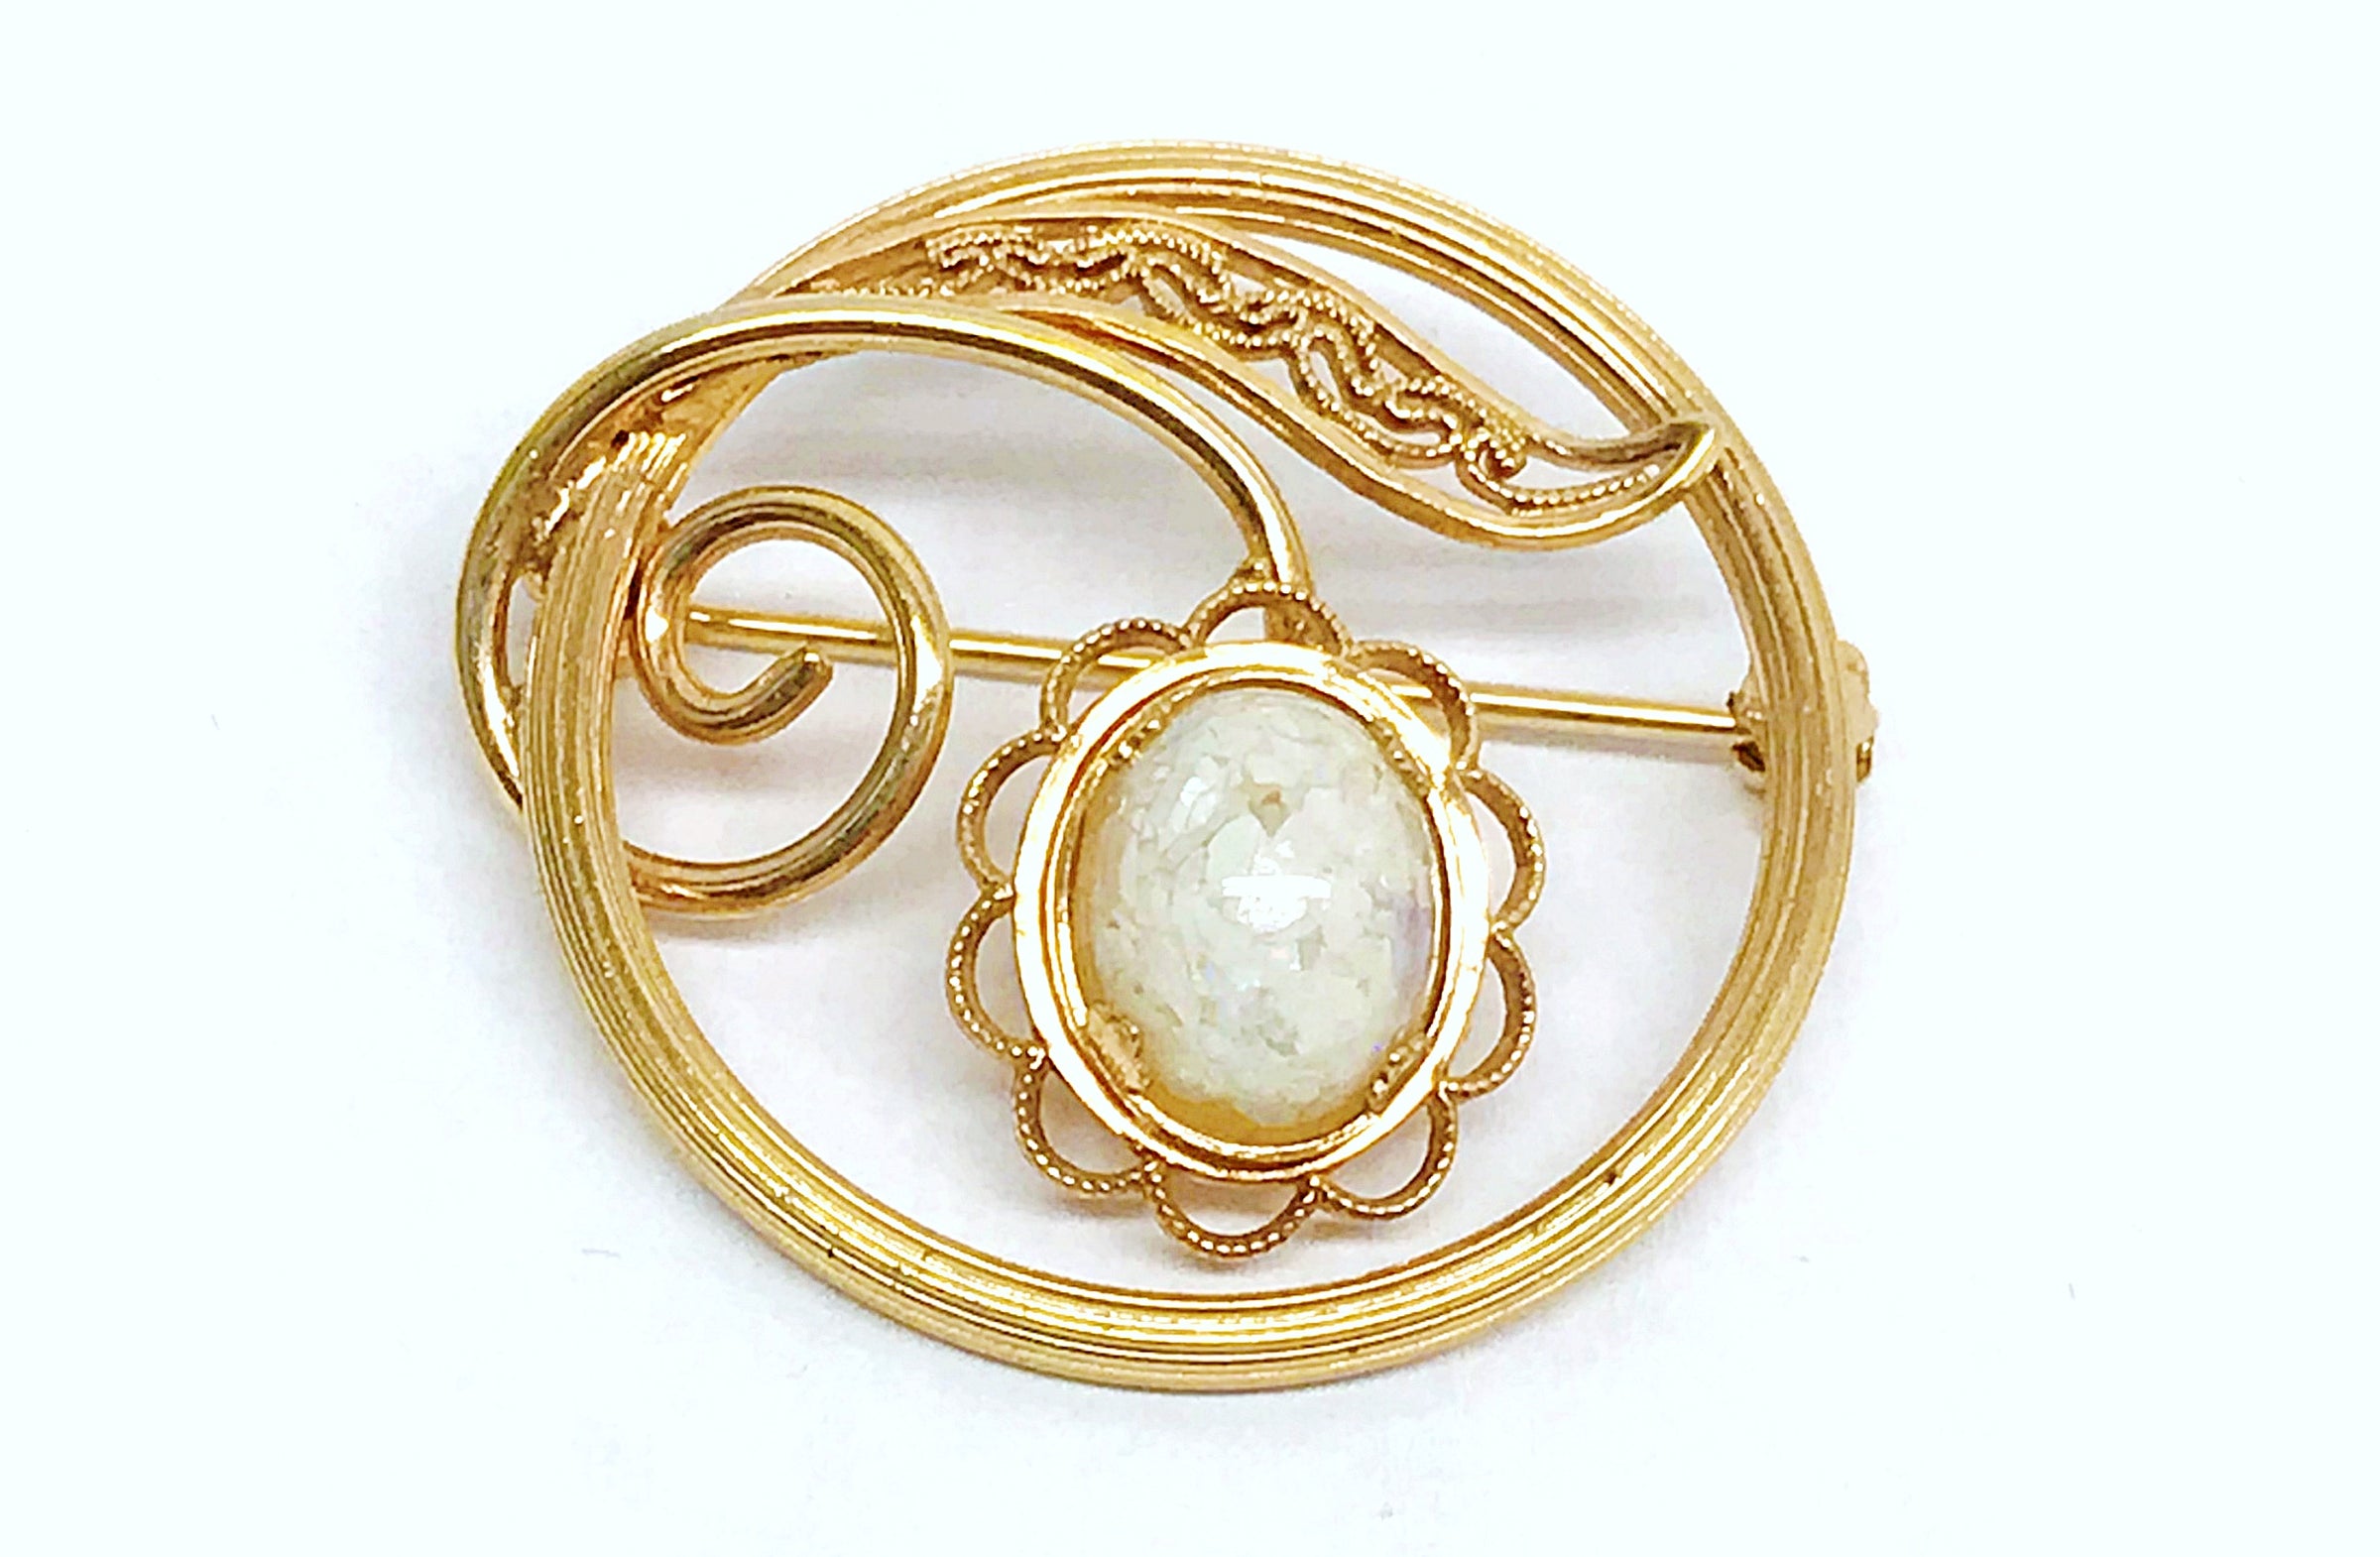 1919-1970's AMCO 14K Gold Filled Opal Chip In Resin Flower Brooch Pin - Hers and His Treasures